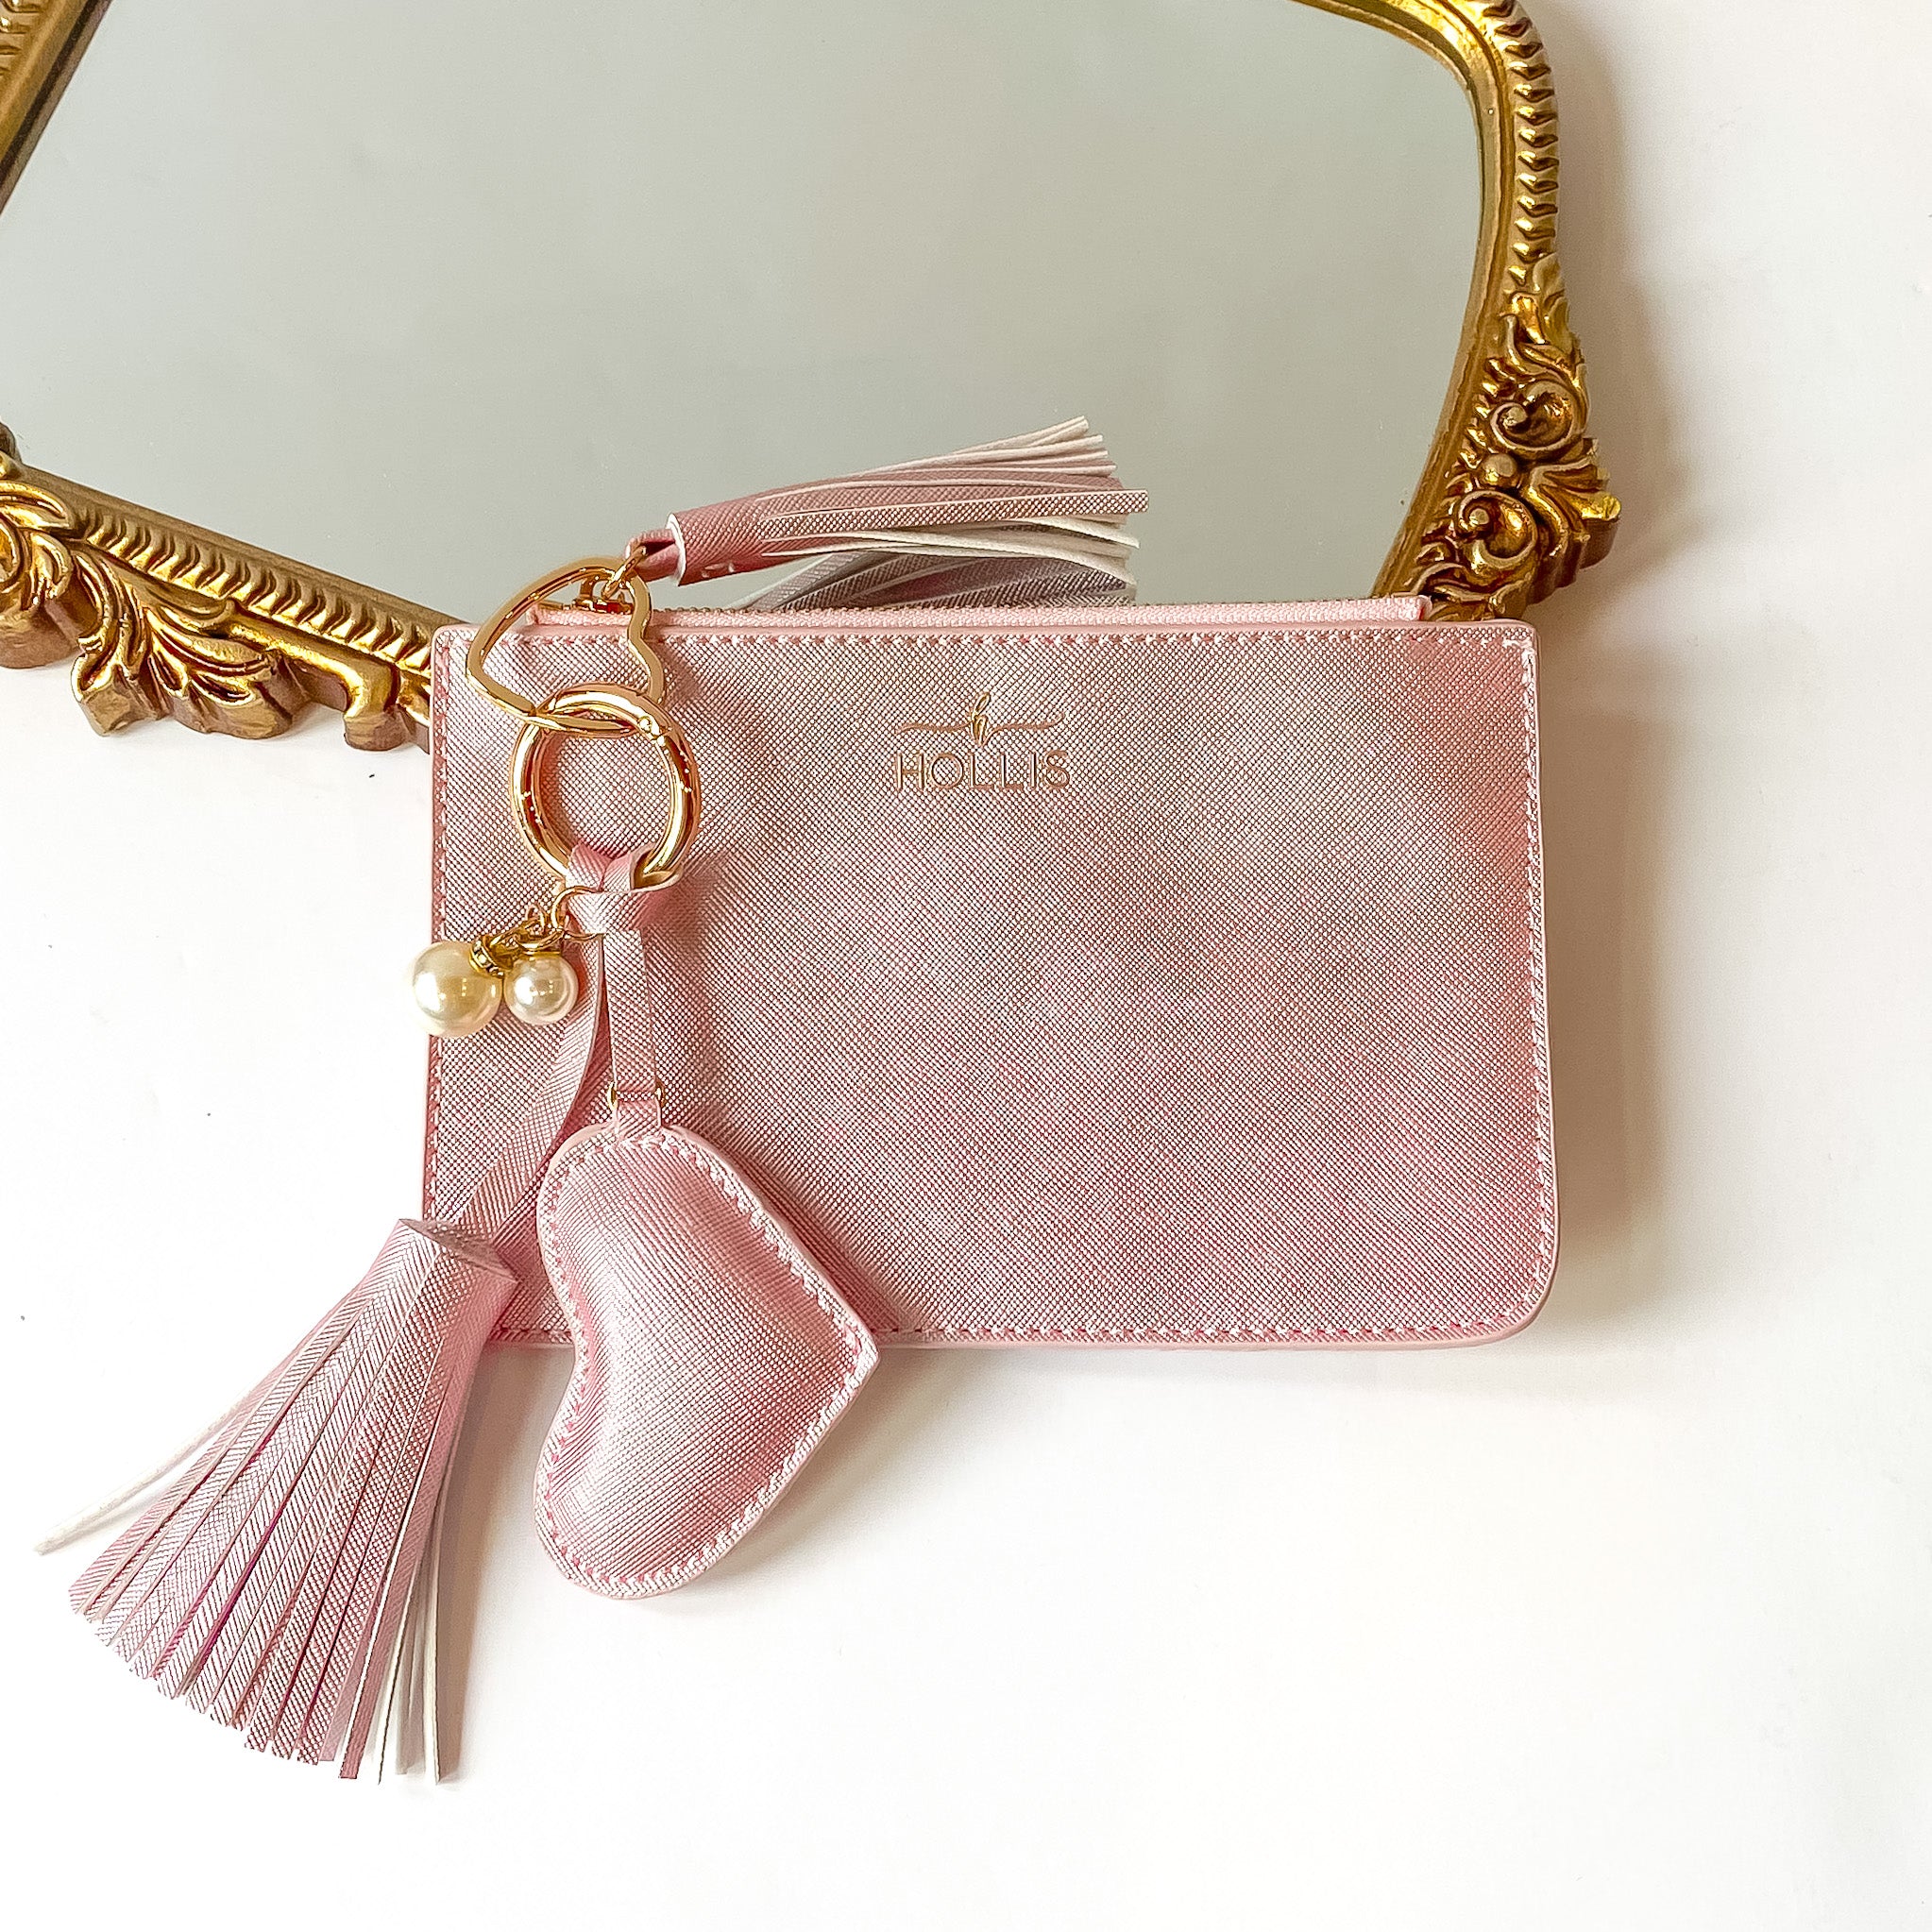 Metallic blush pink coin pouch with a gold HOLLIS emblem at the top and a top zipper. This coin pouch has a gold key ring, gold heart key ring, a blush tassel charm, a blush heart charm and white pearl charms. This luggage tag is pictured partially laying on a gold mirror on a white background. 